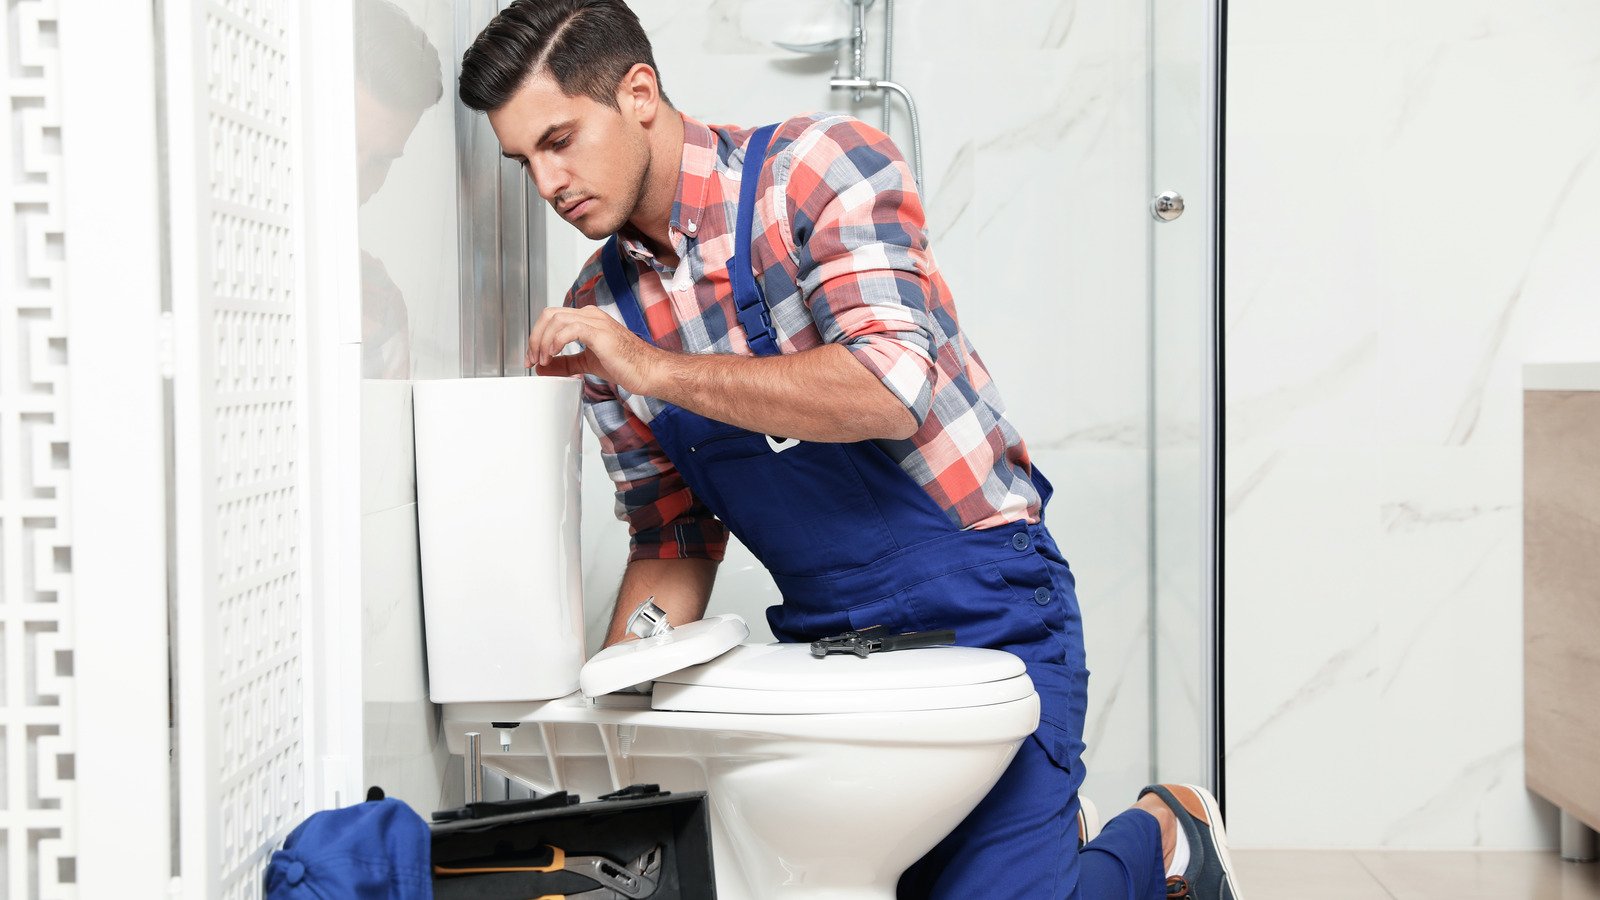 The Biggest Scams To Watch For With Plumbers - House Digest